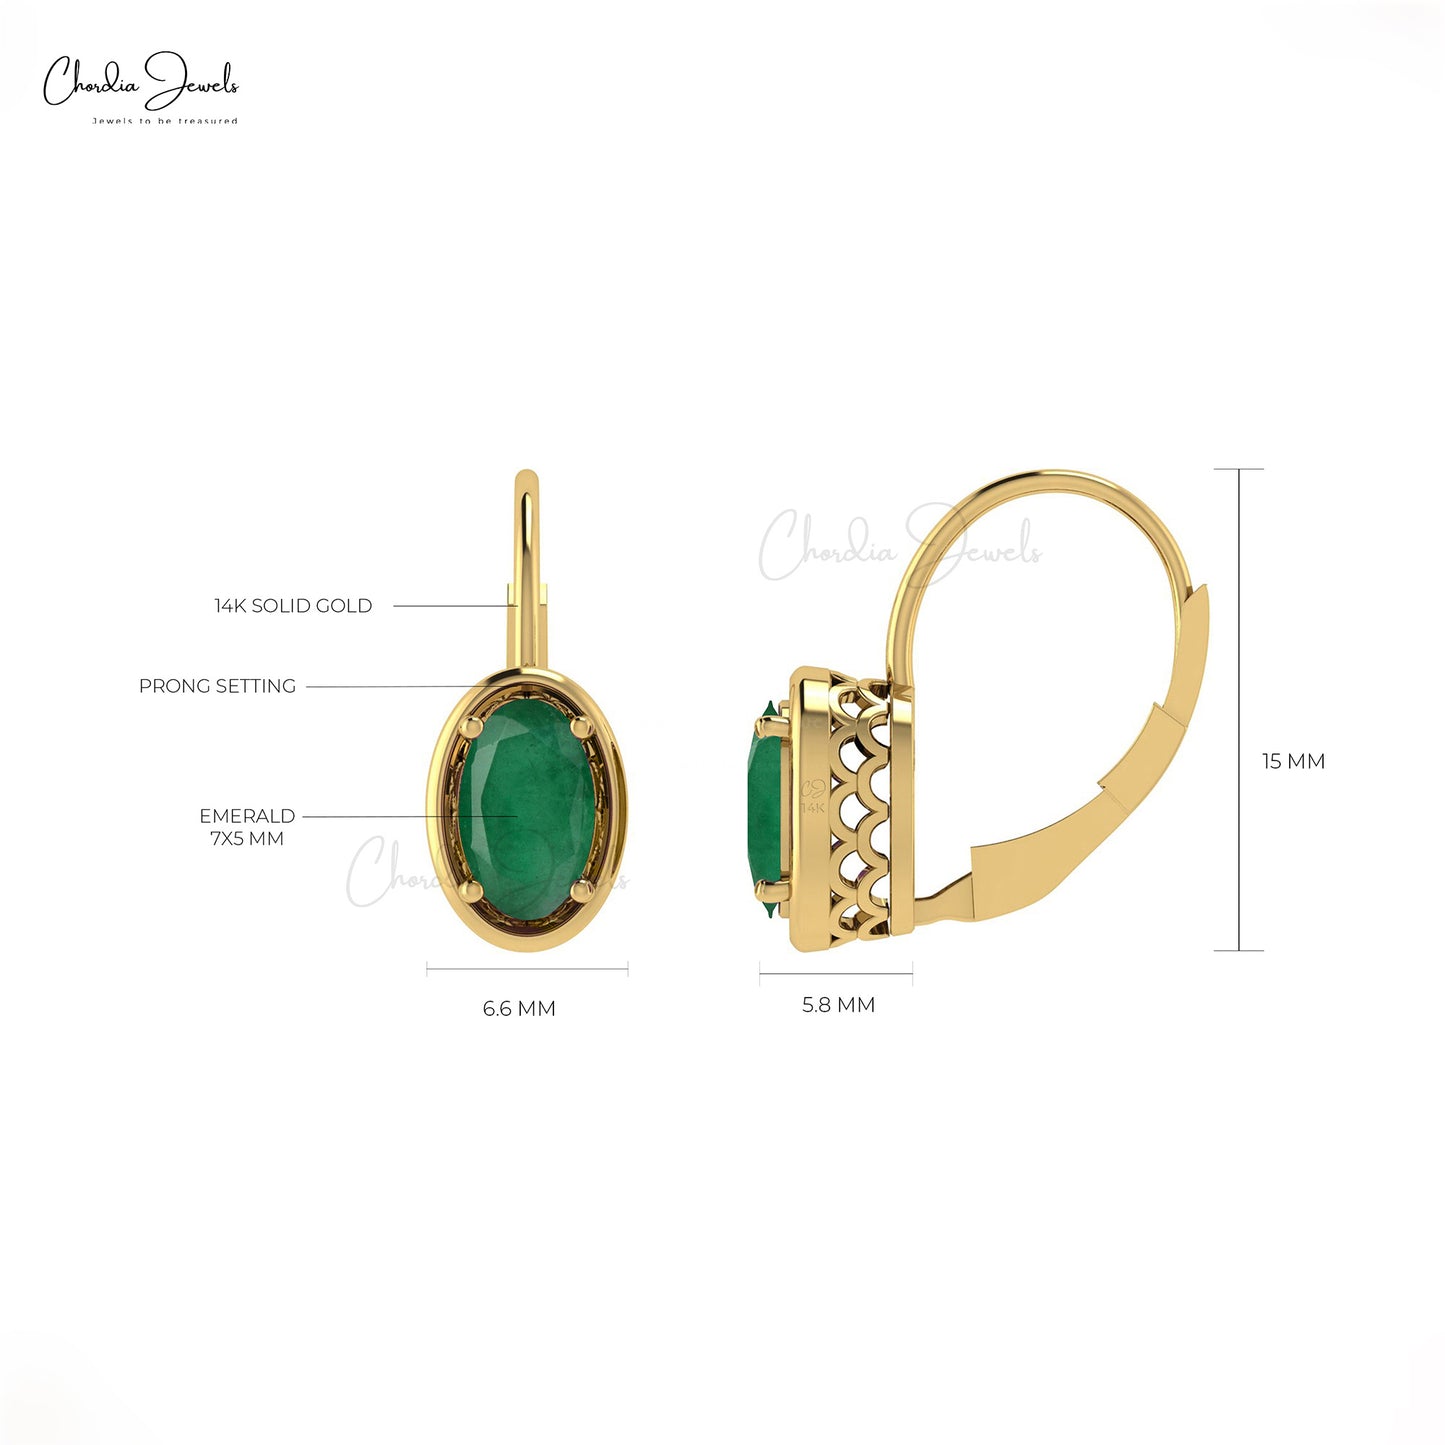 Enhance your personal style with our emerald earrings.